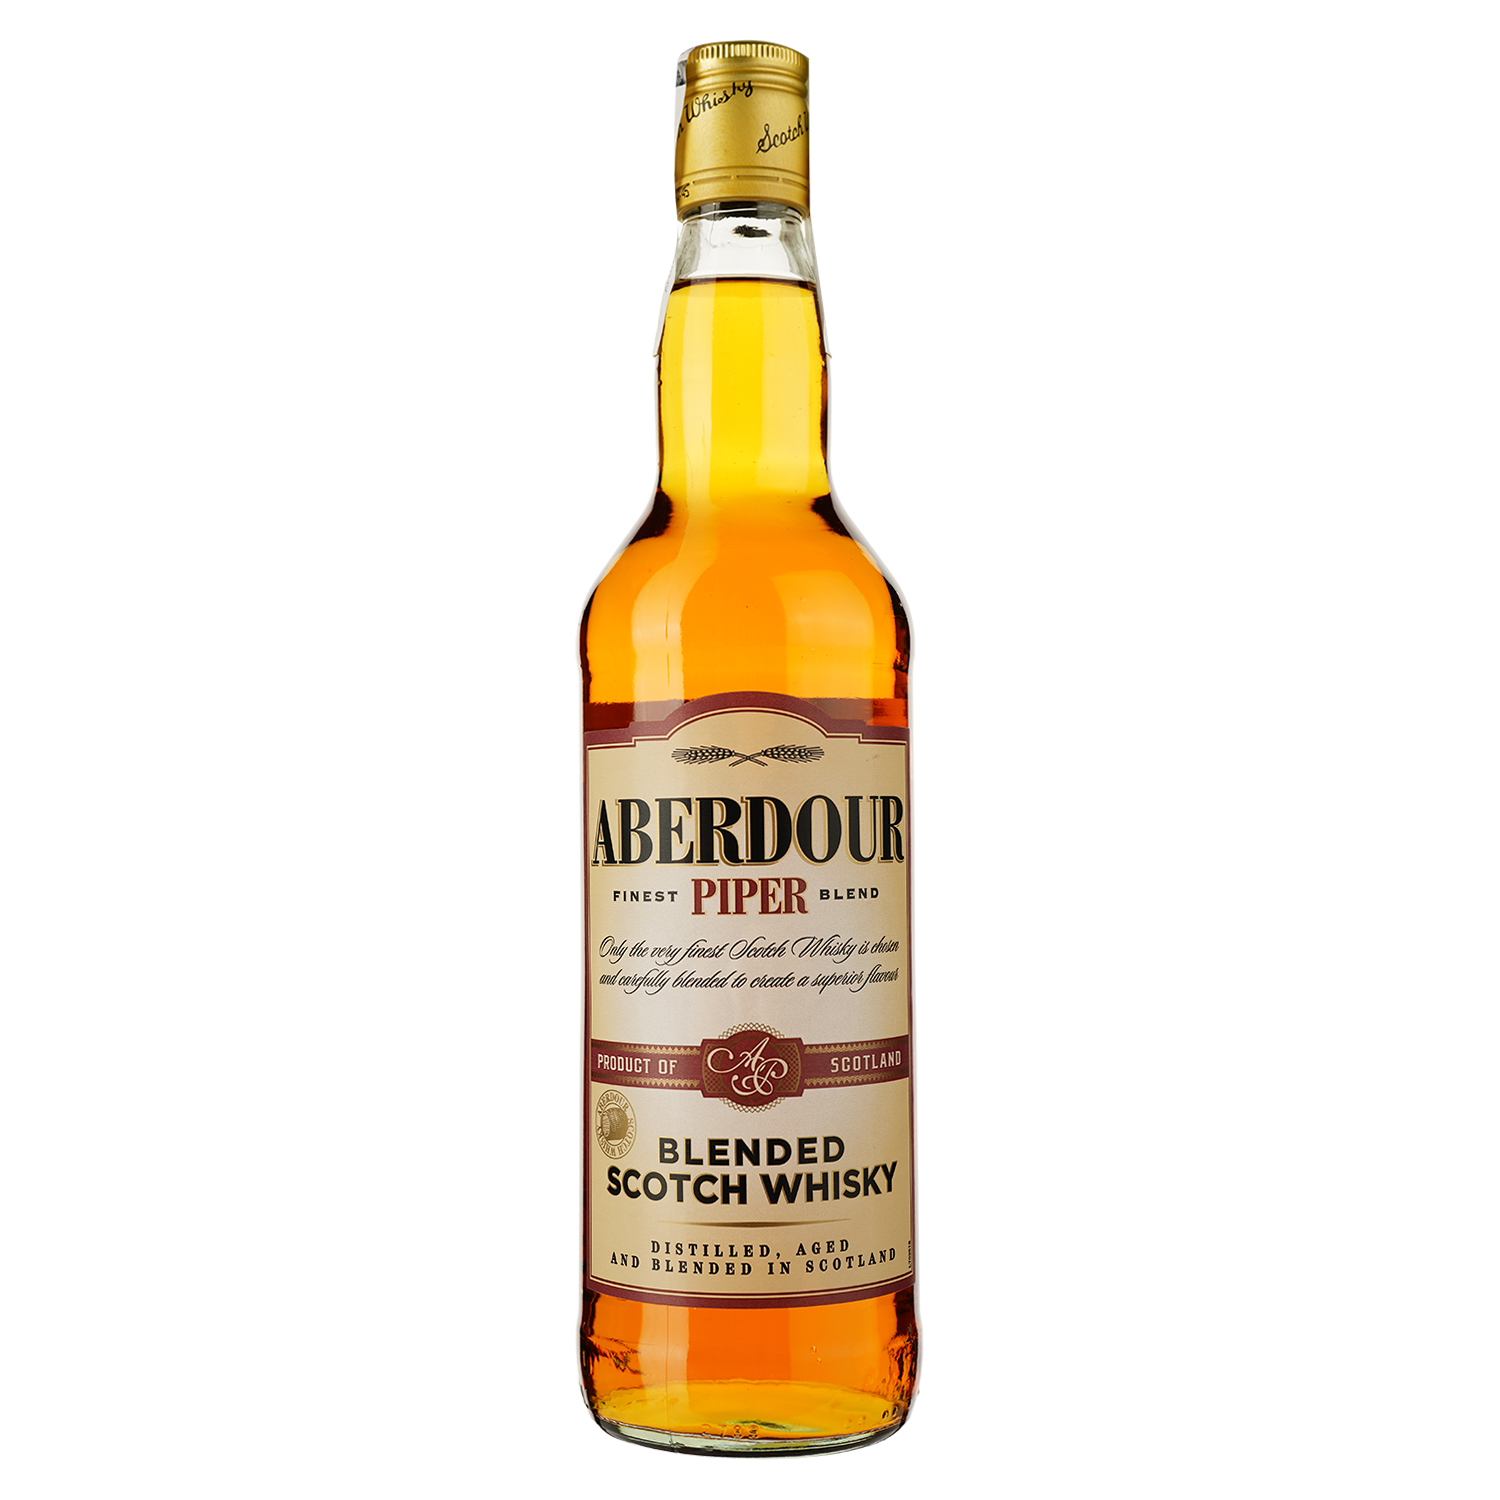 Виски Aberdour Piper Blended Scotch Whisky, 40%, 0,7 л - фото 1